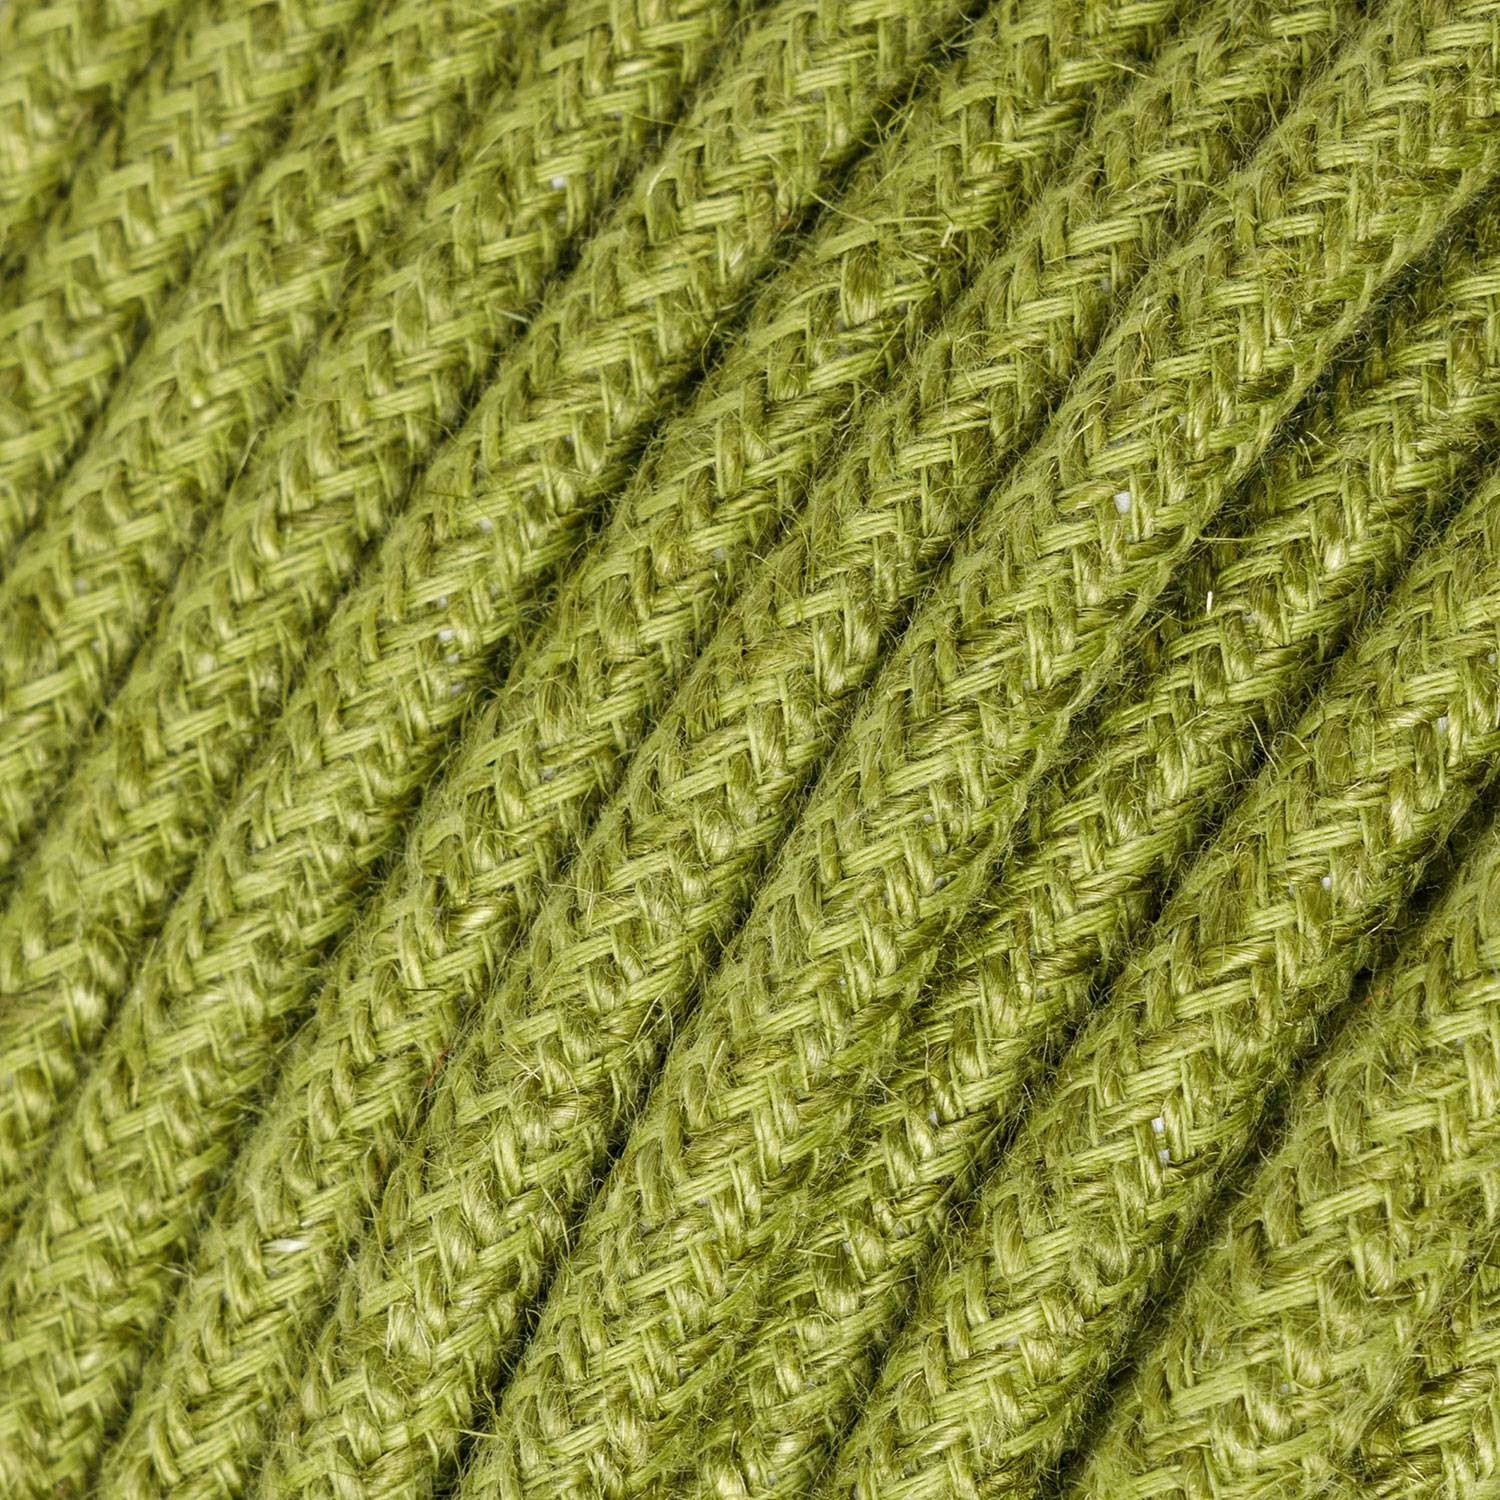 Round electric Cable covered in Plain Hay Green RN23 Jute